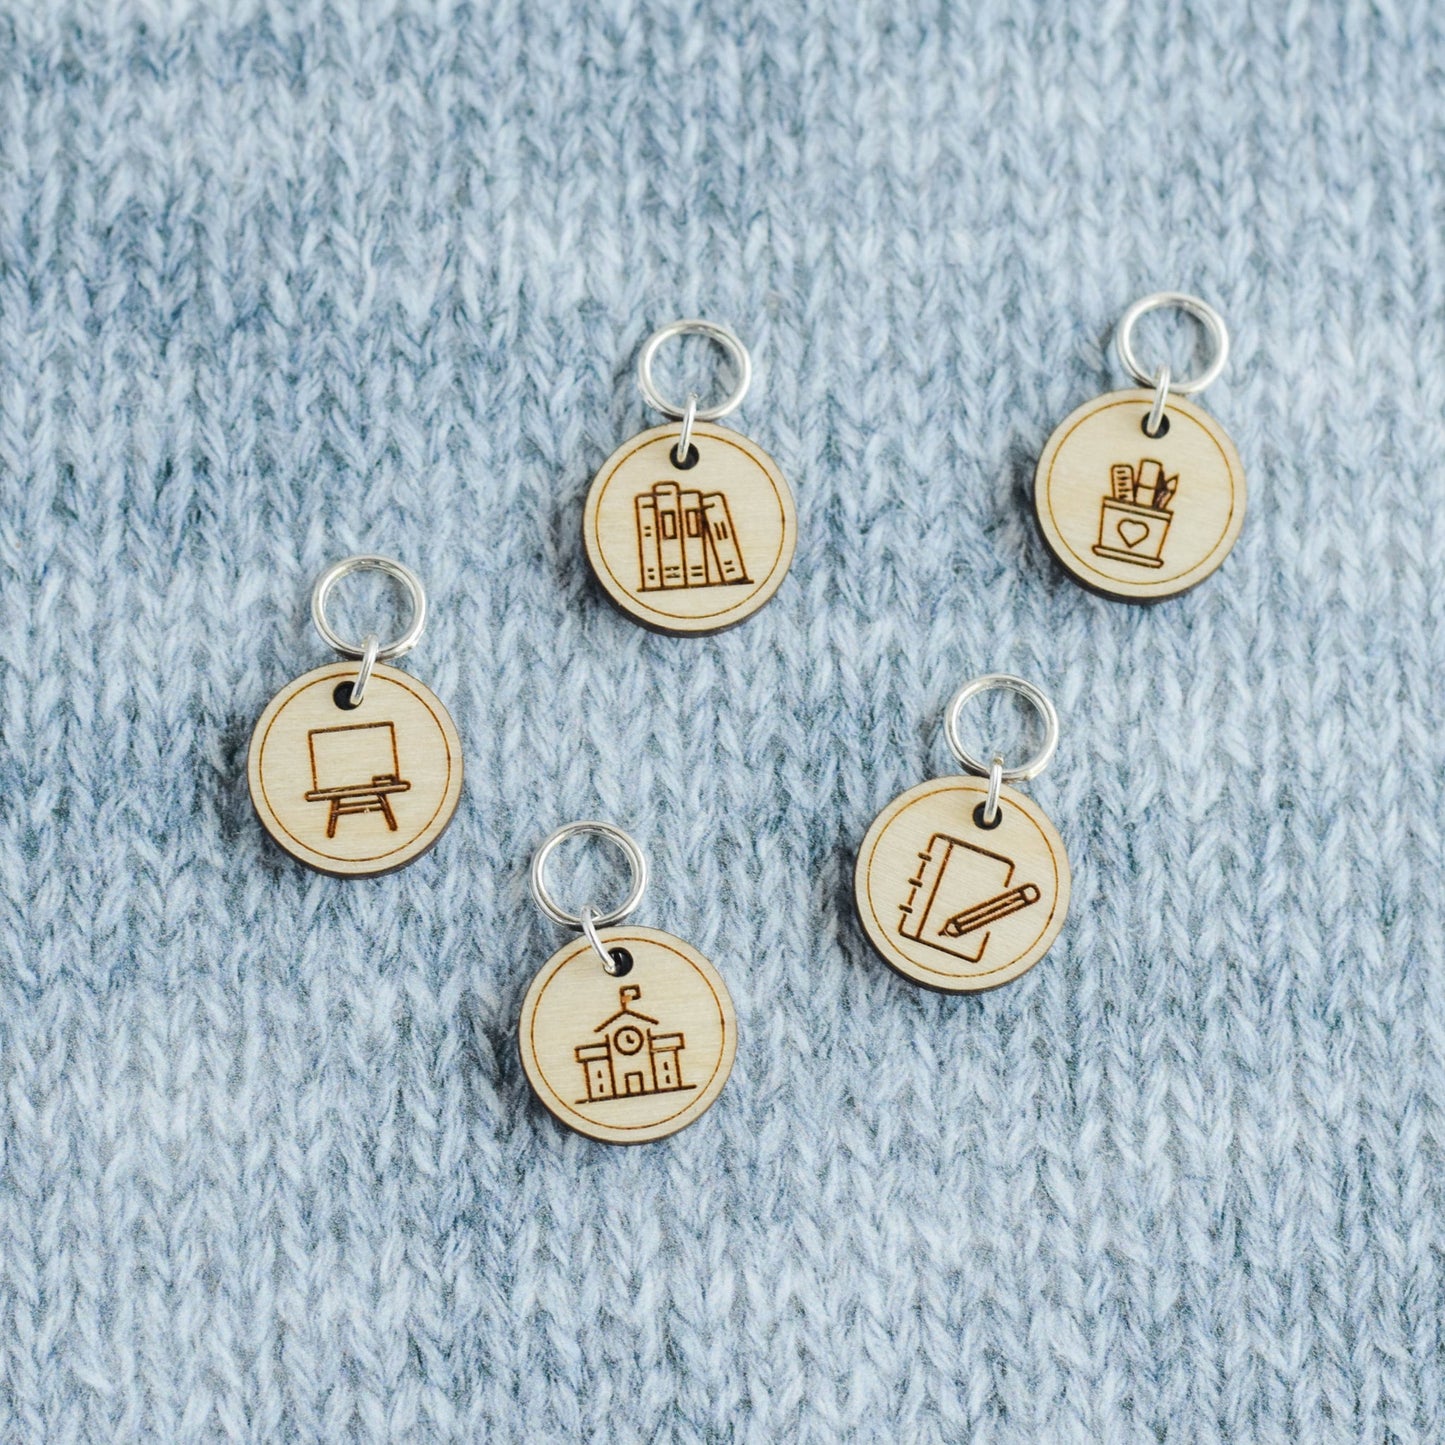 Set of 5 School Stitch Markers, Teacher Markers, Laser Engraved Wood Stitch Markers, Back to School Stitch Markers